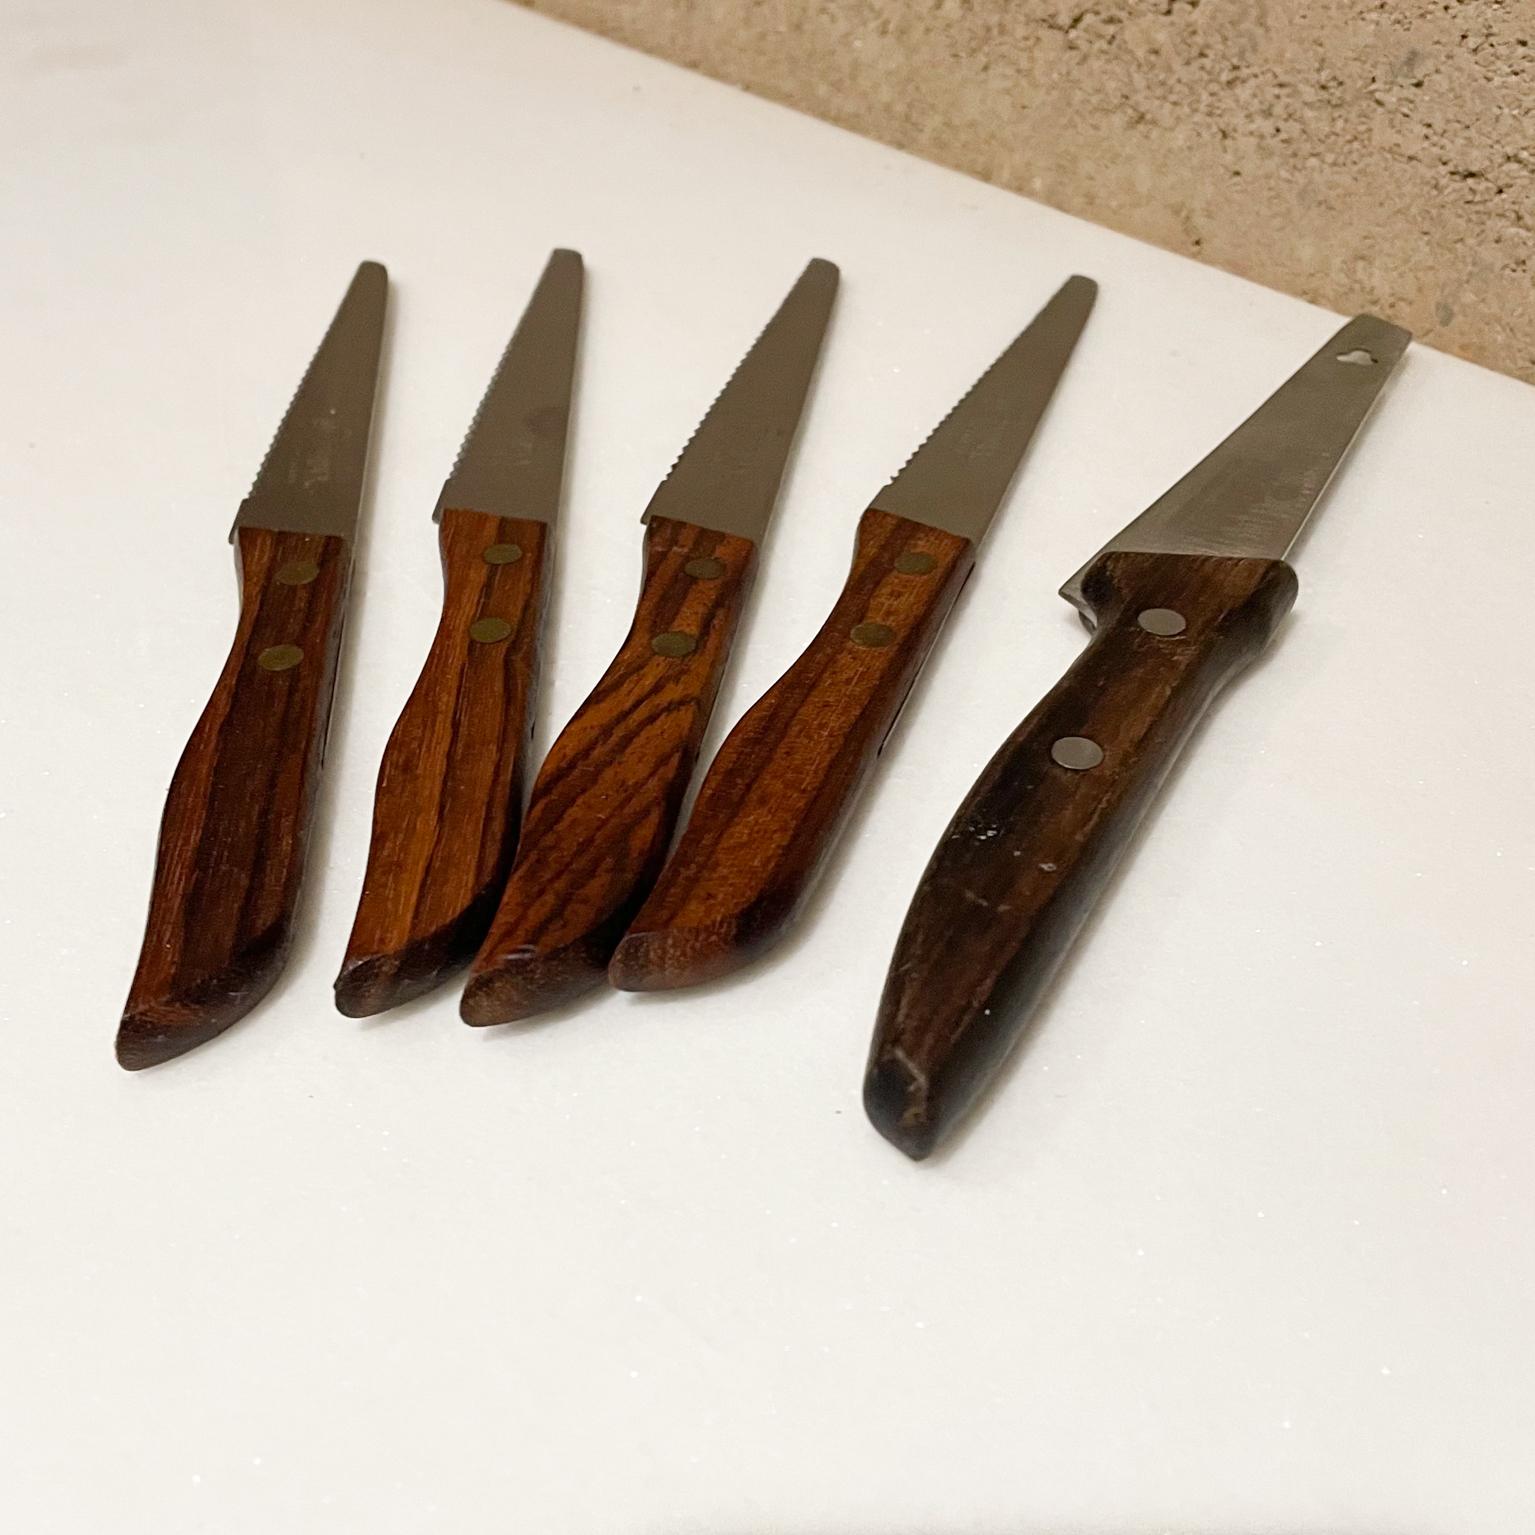 Midcentury Modern cutlery knives
By Moravan Steak Knives Set of 5 Midcentury Modern Japan 1960s
Stainless steel and wood 
Measures: 8 x .75 x .38 thick inches
Preowned Original unrestored Vintage condition.
See images please.
 